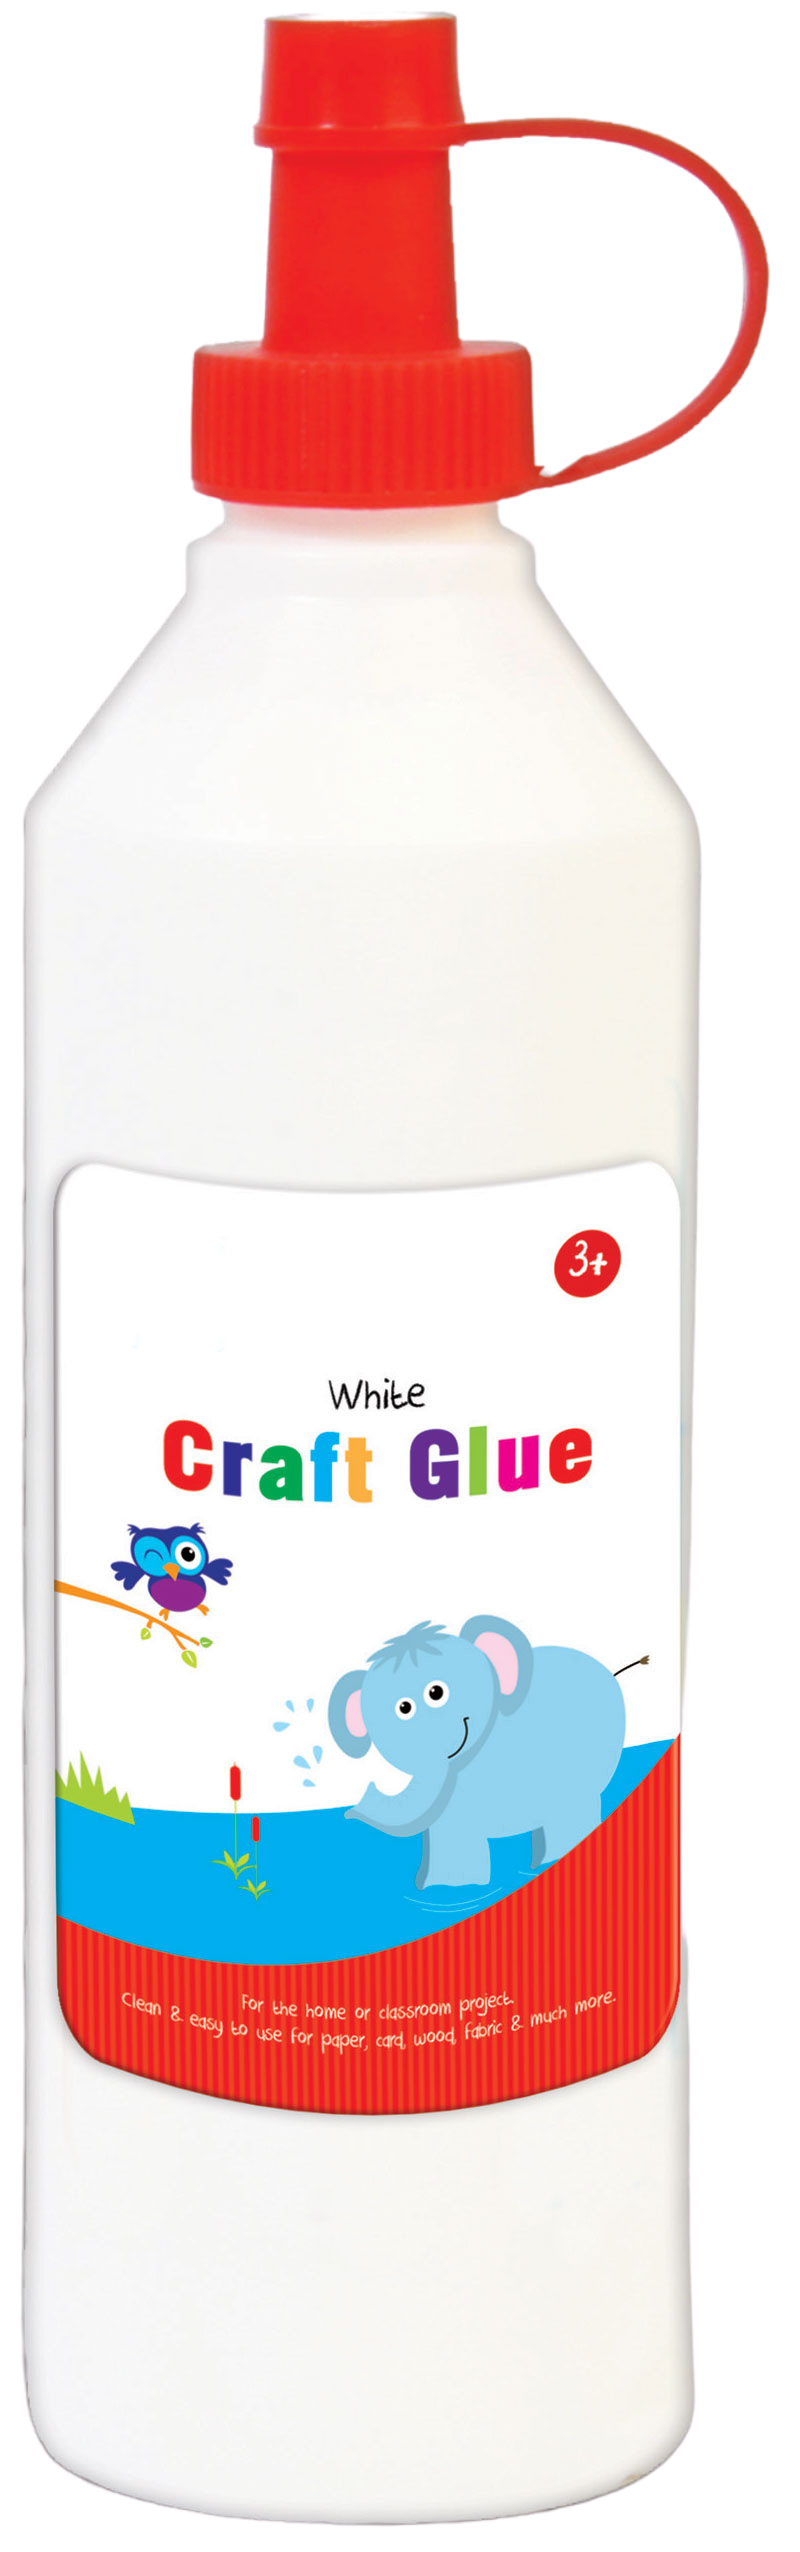 Is your child into arts & crafts? Then he/she will love this PVA glue for all their crafty creations, they will have so much fun sticking all kinds of materials with this great glue, great as a rainy day activity, your little one can make cards and pictures for all their loved ones.